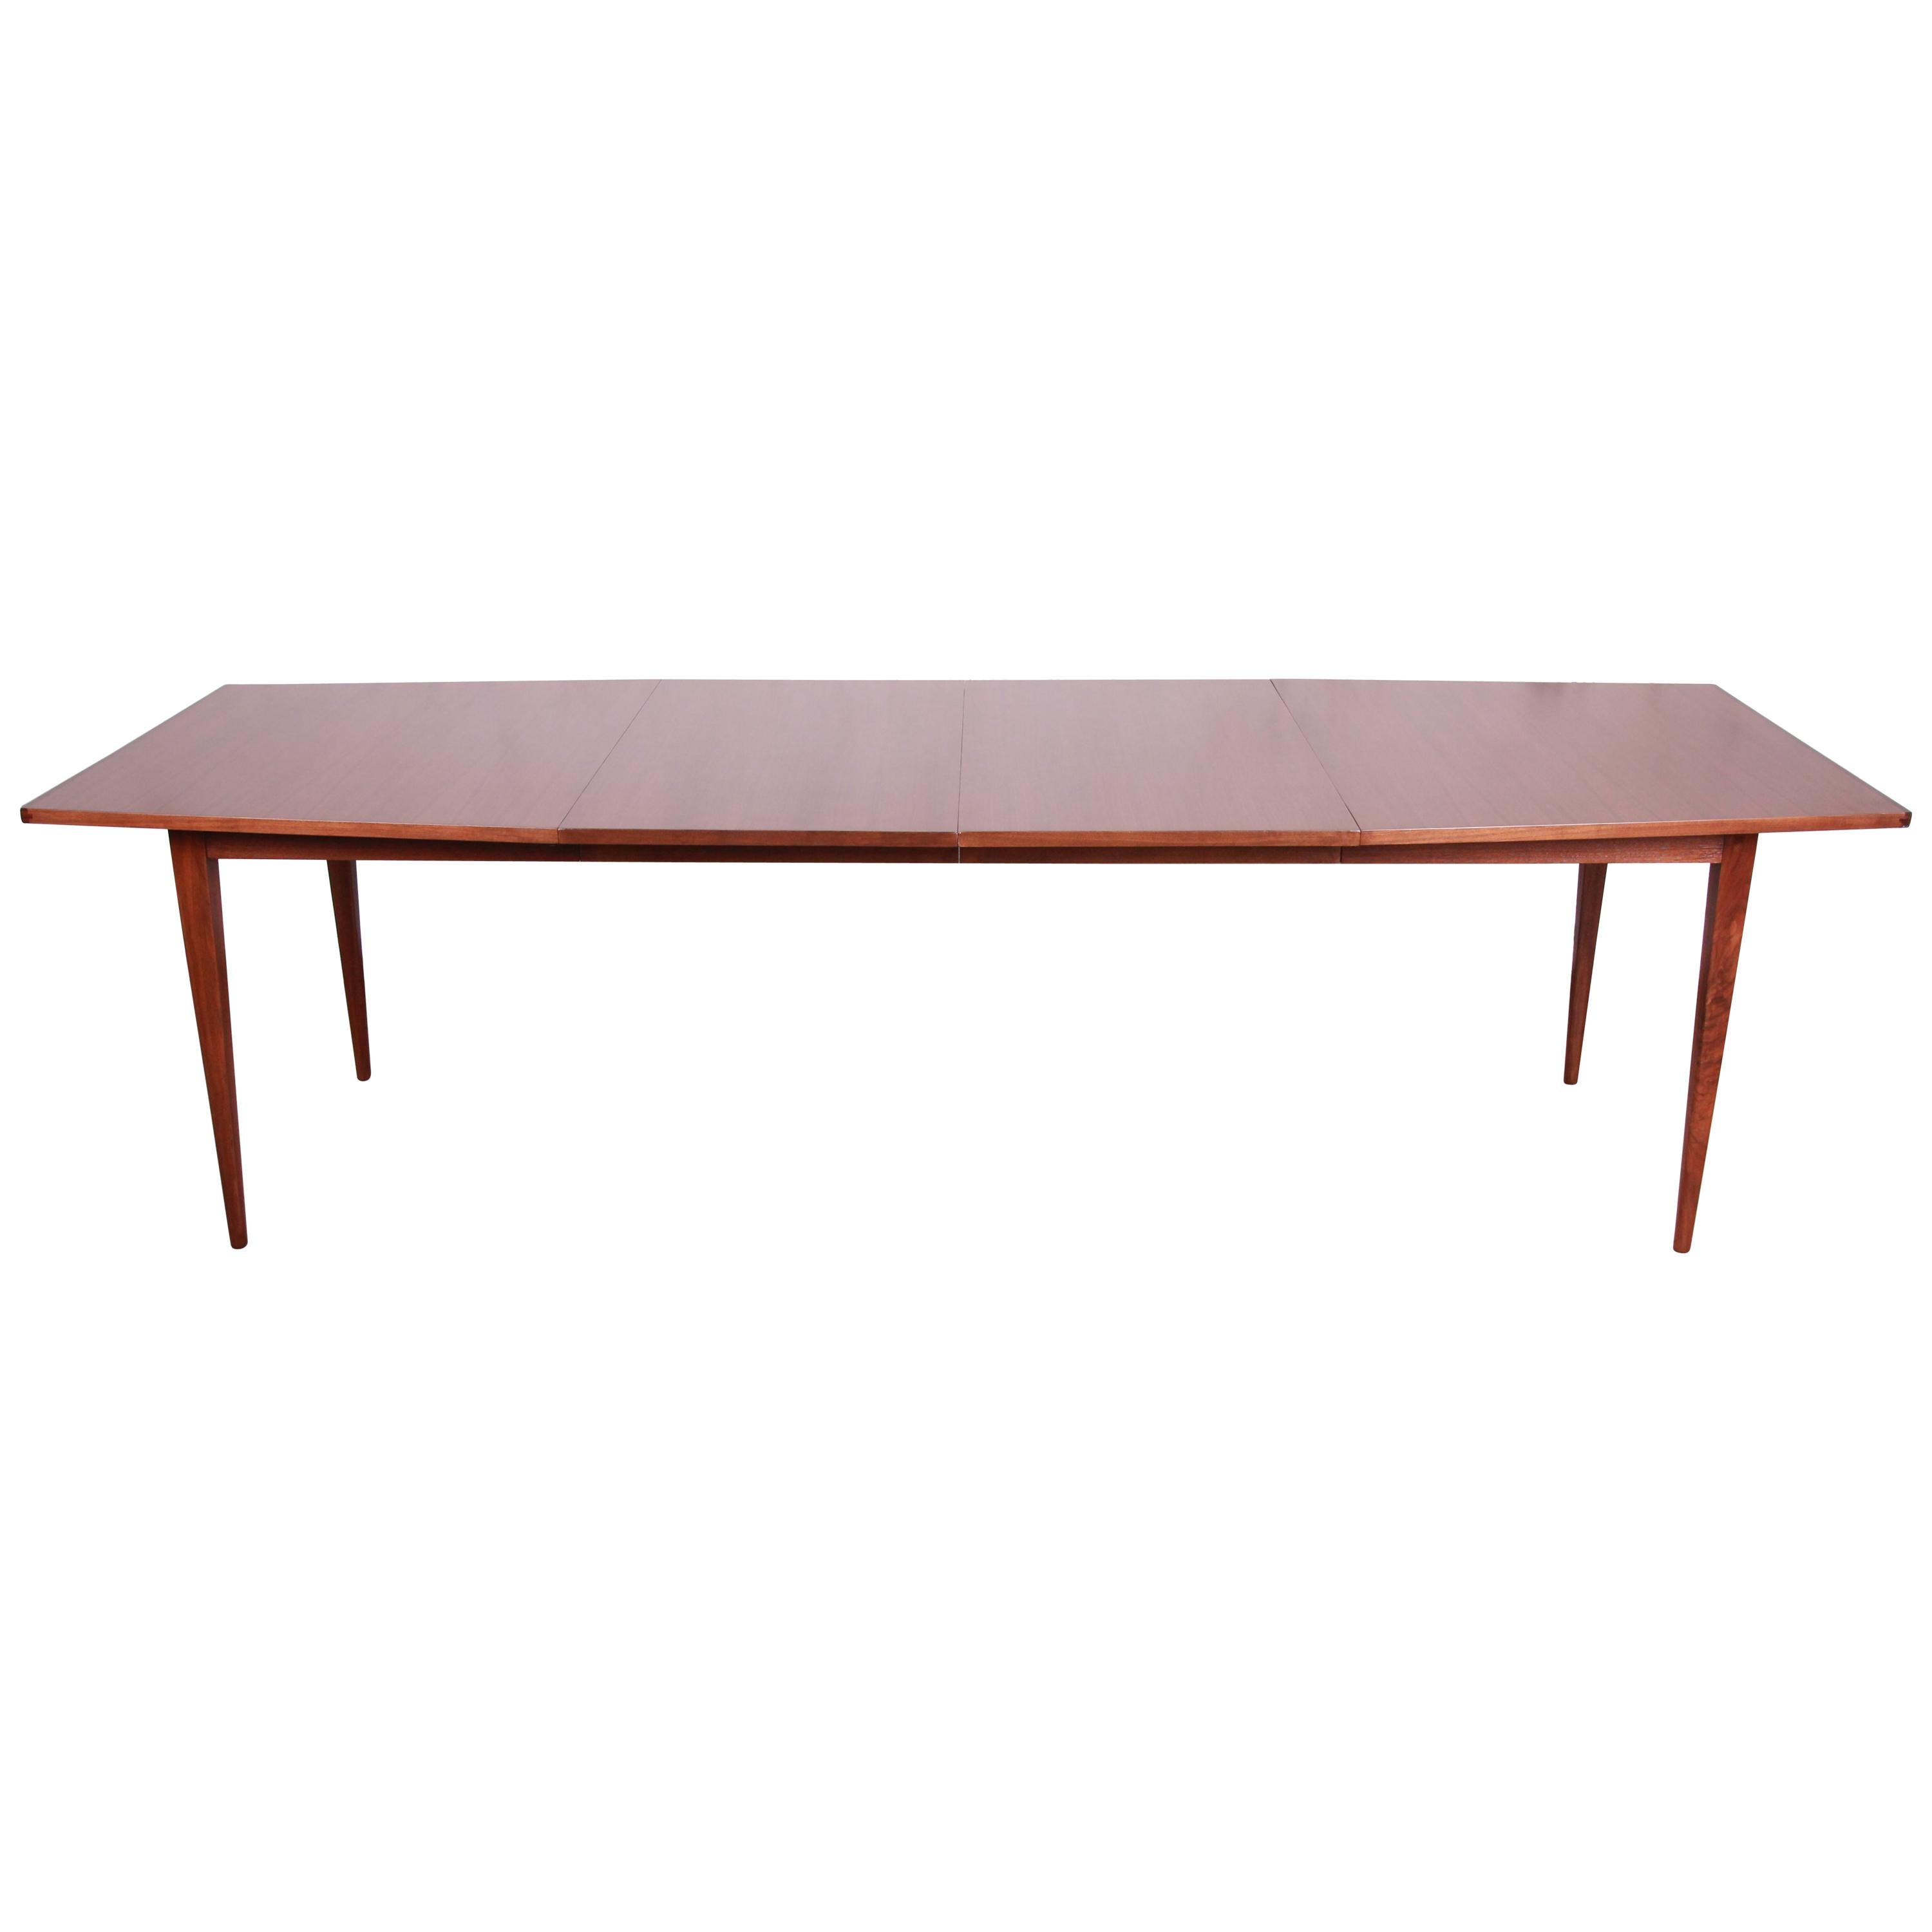 Kipp Stewart for Calvin Walnut and Rosewood Boat-Shaped Extension Dining Table